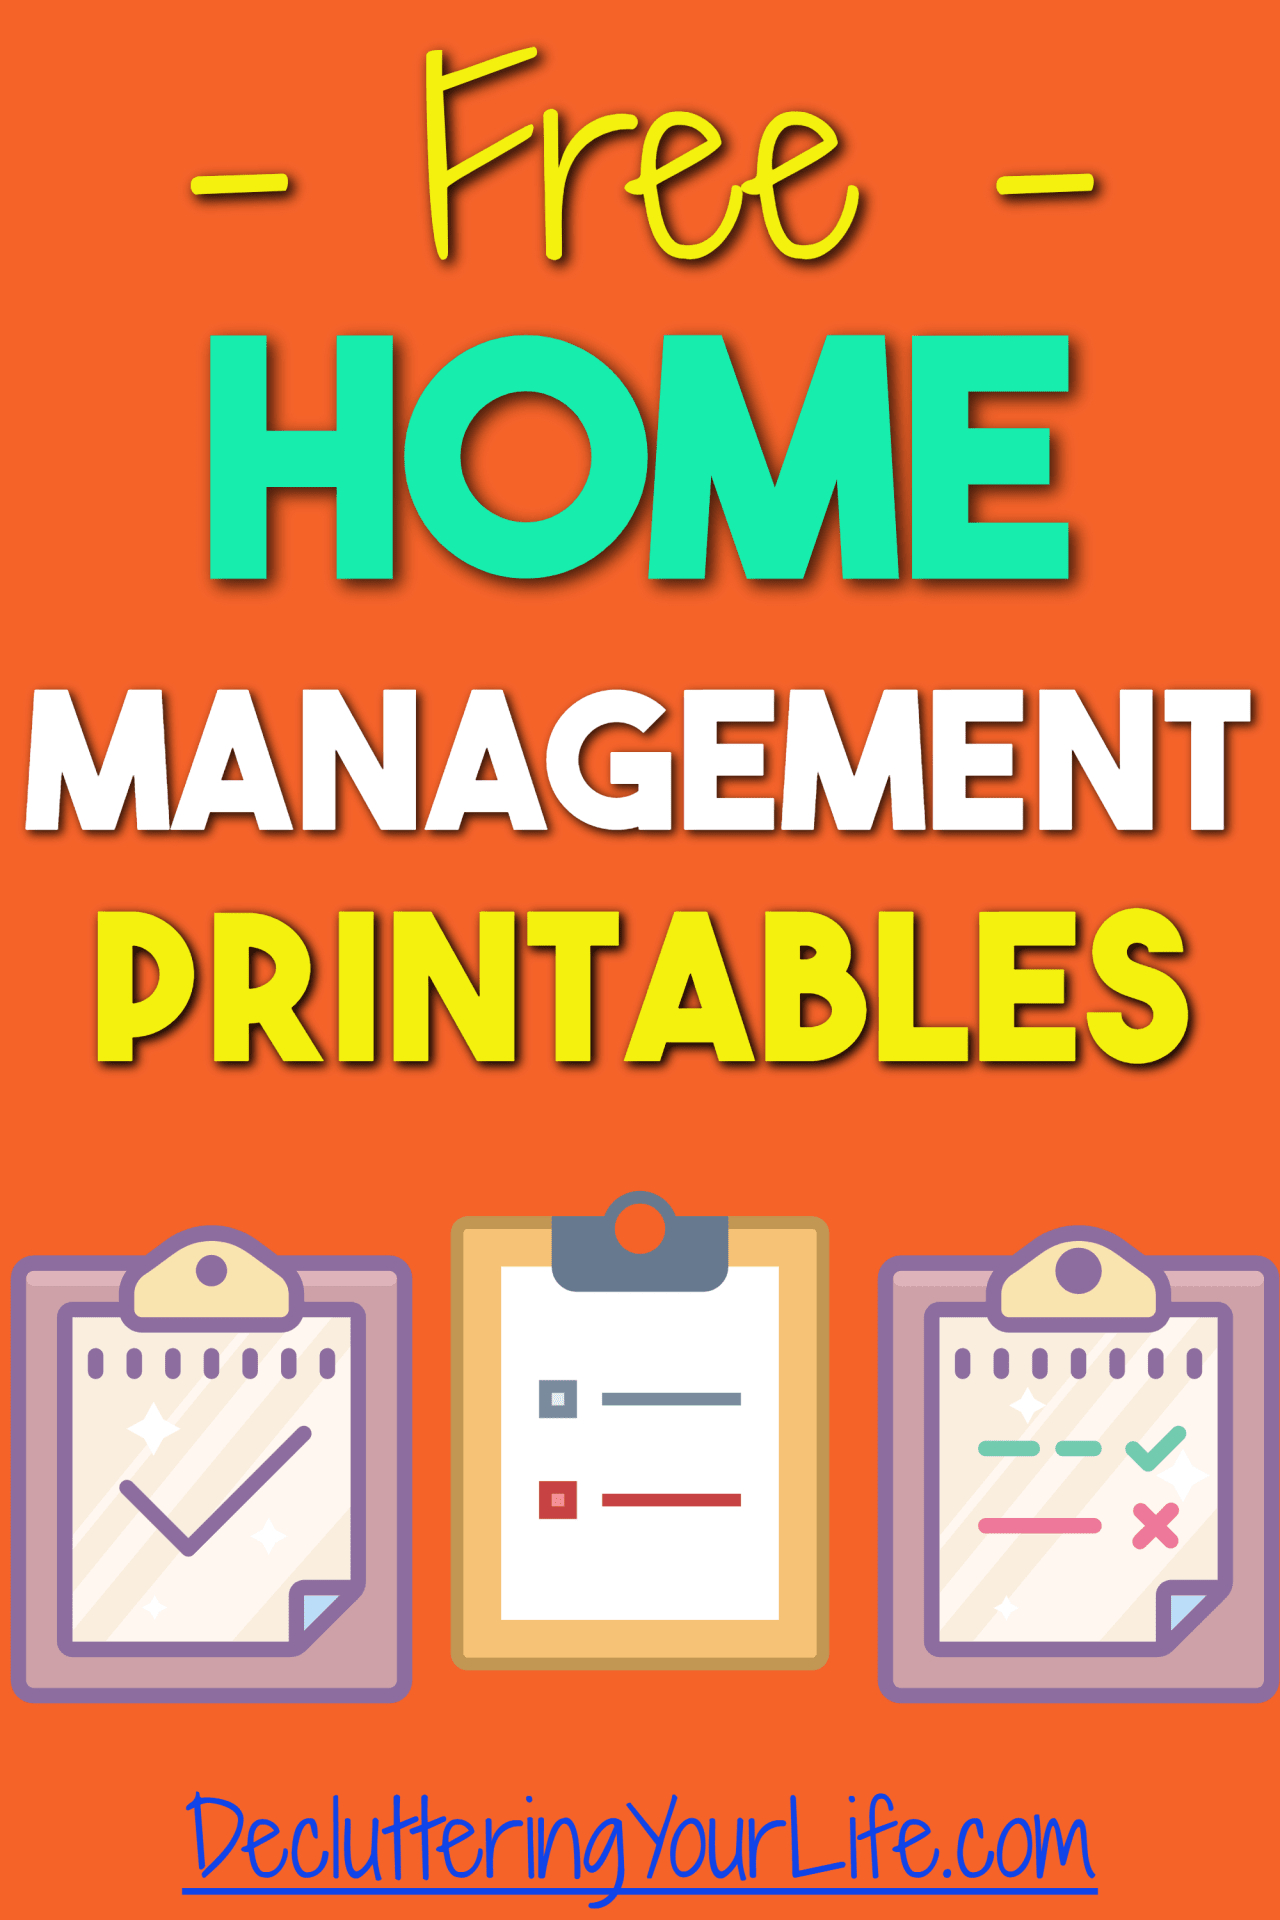 Home Management Printables  Free Organization And Budgeting Printables Together With Free Printable Home Organization Worksheets